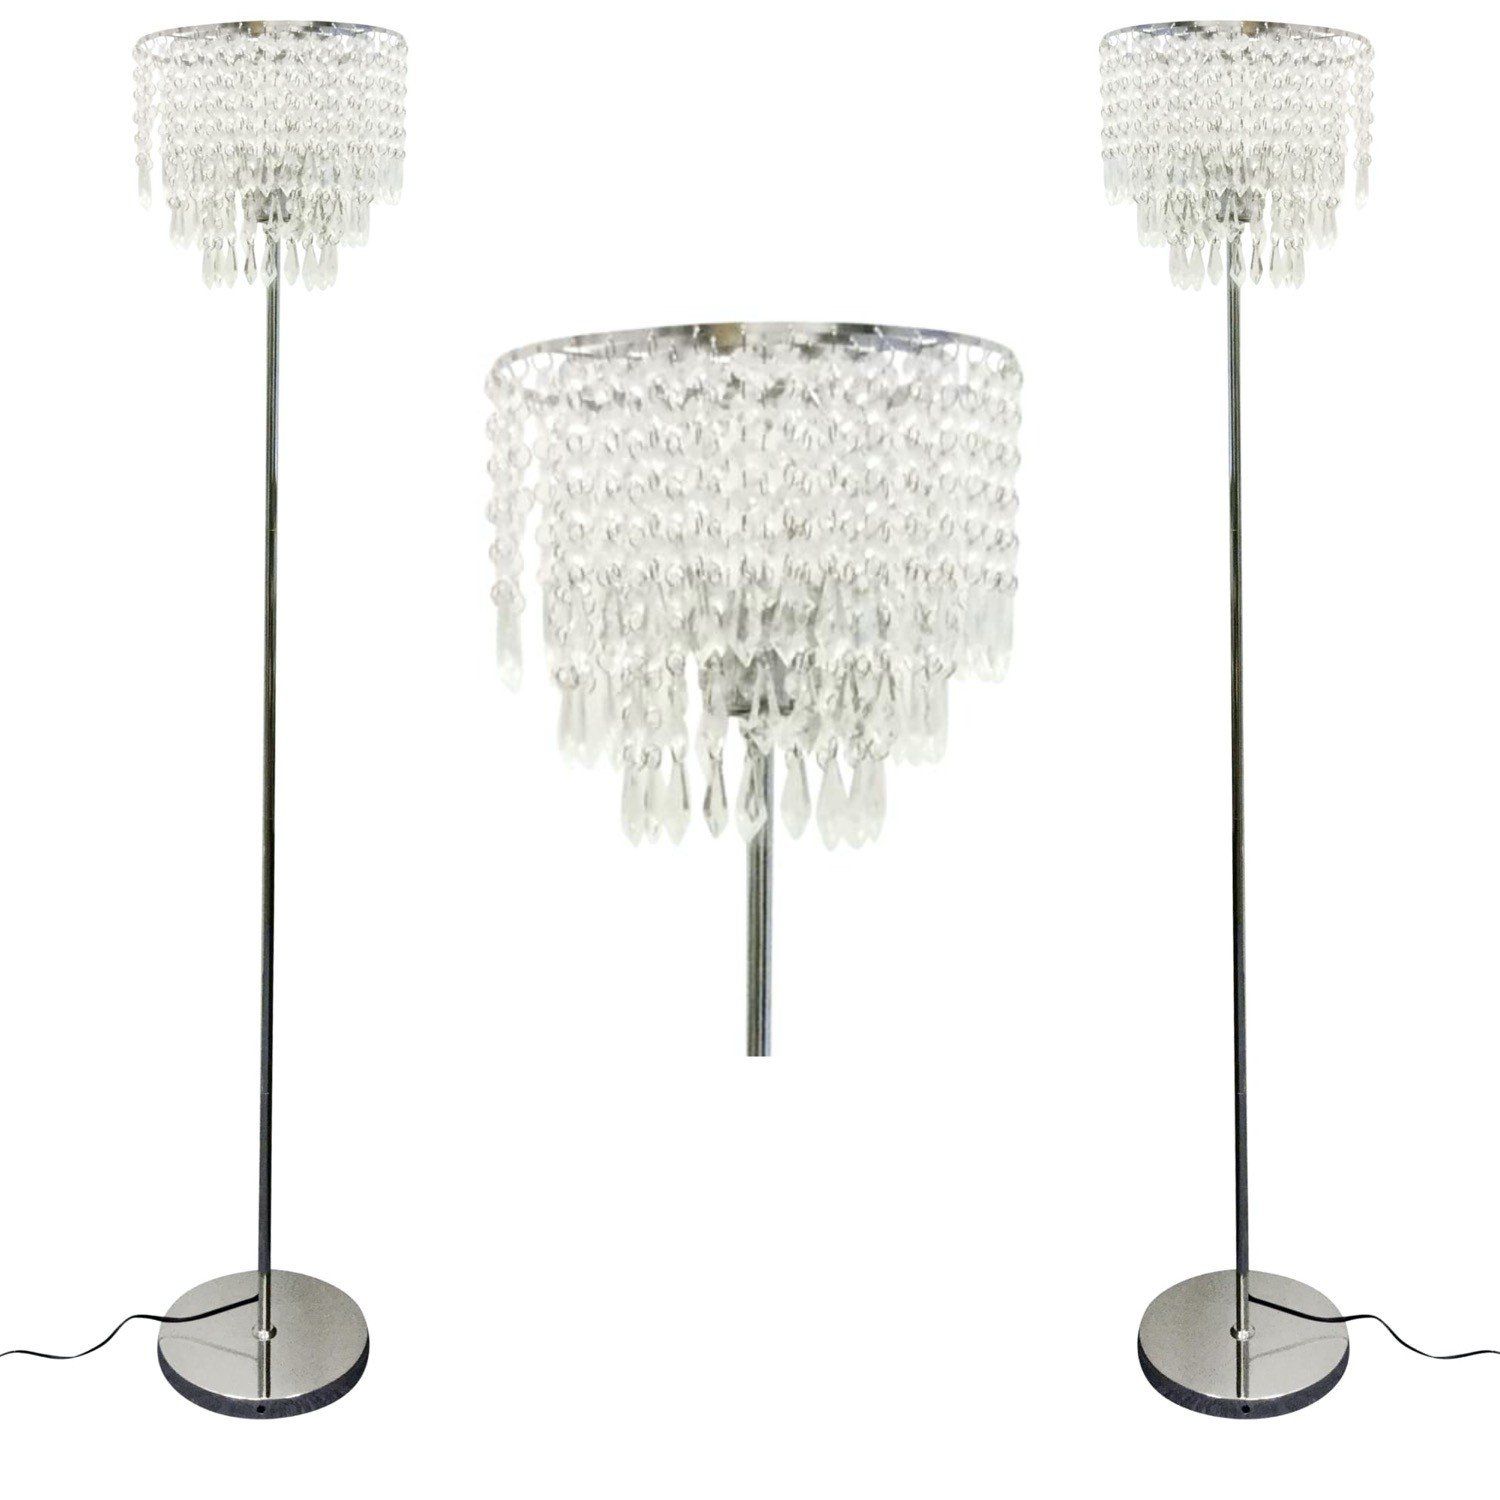 Set Of 2 Chrome And Acrylic Crystal Jewelled Floor Lamps In Chrome Crystal Tower Floor Lamps (View 15 of 15)